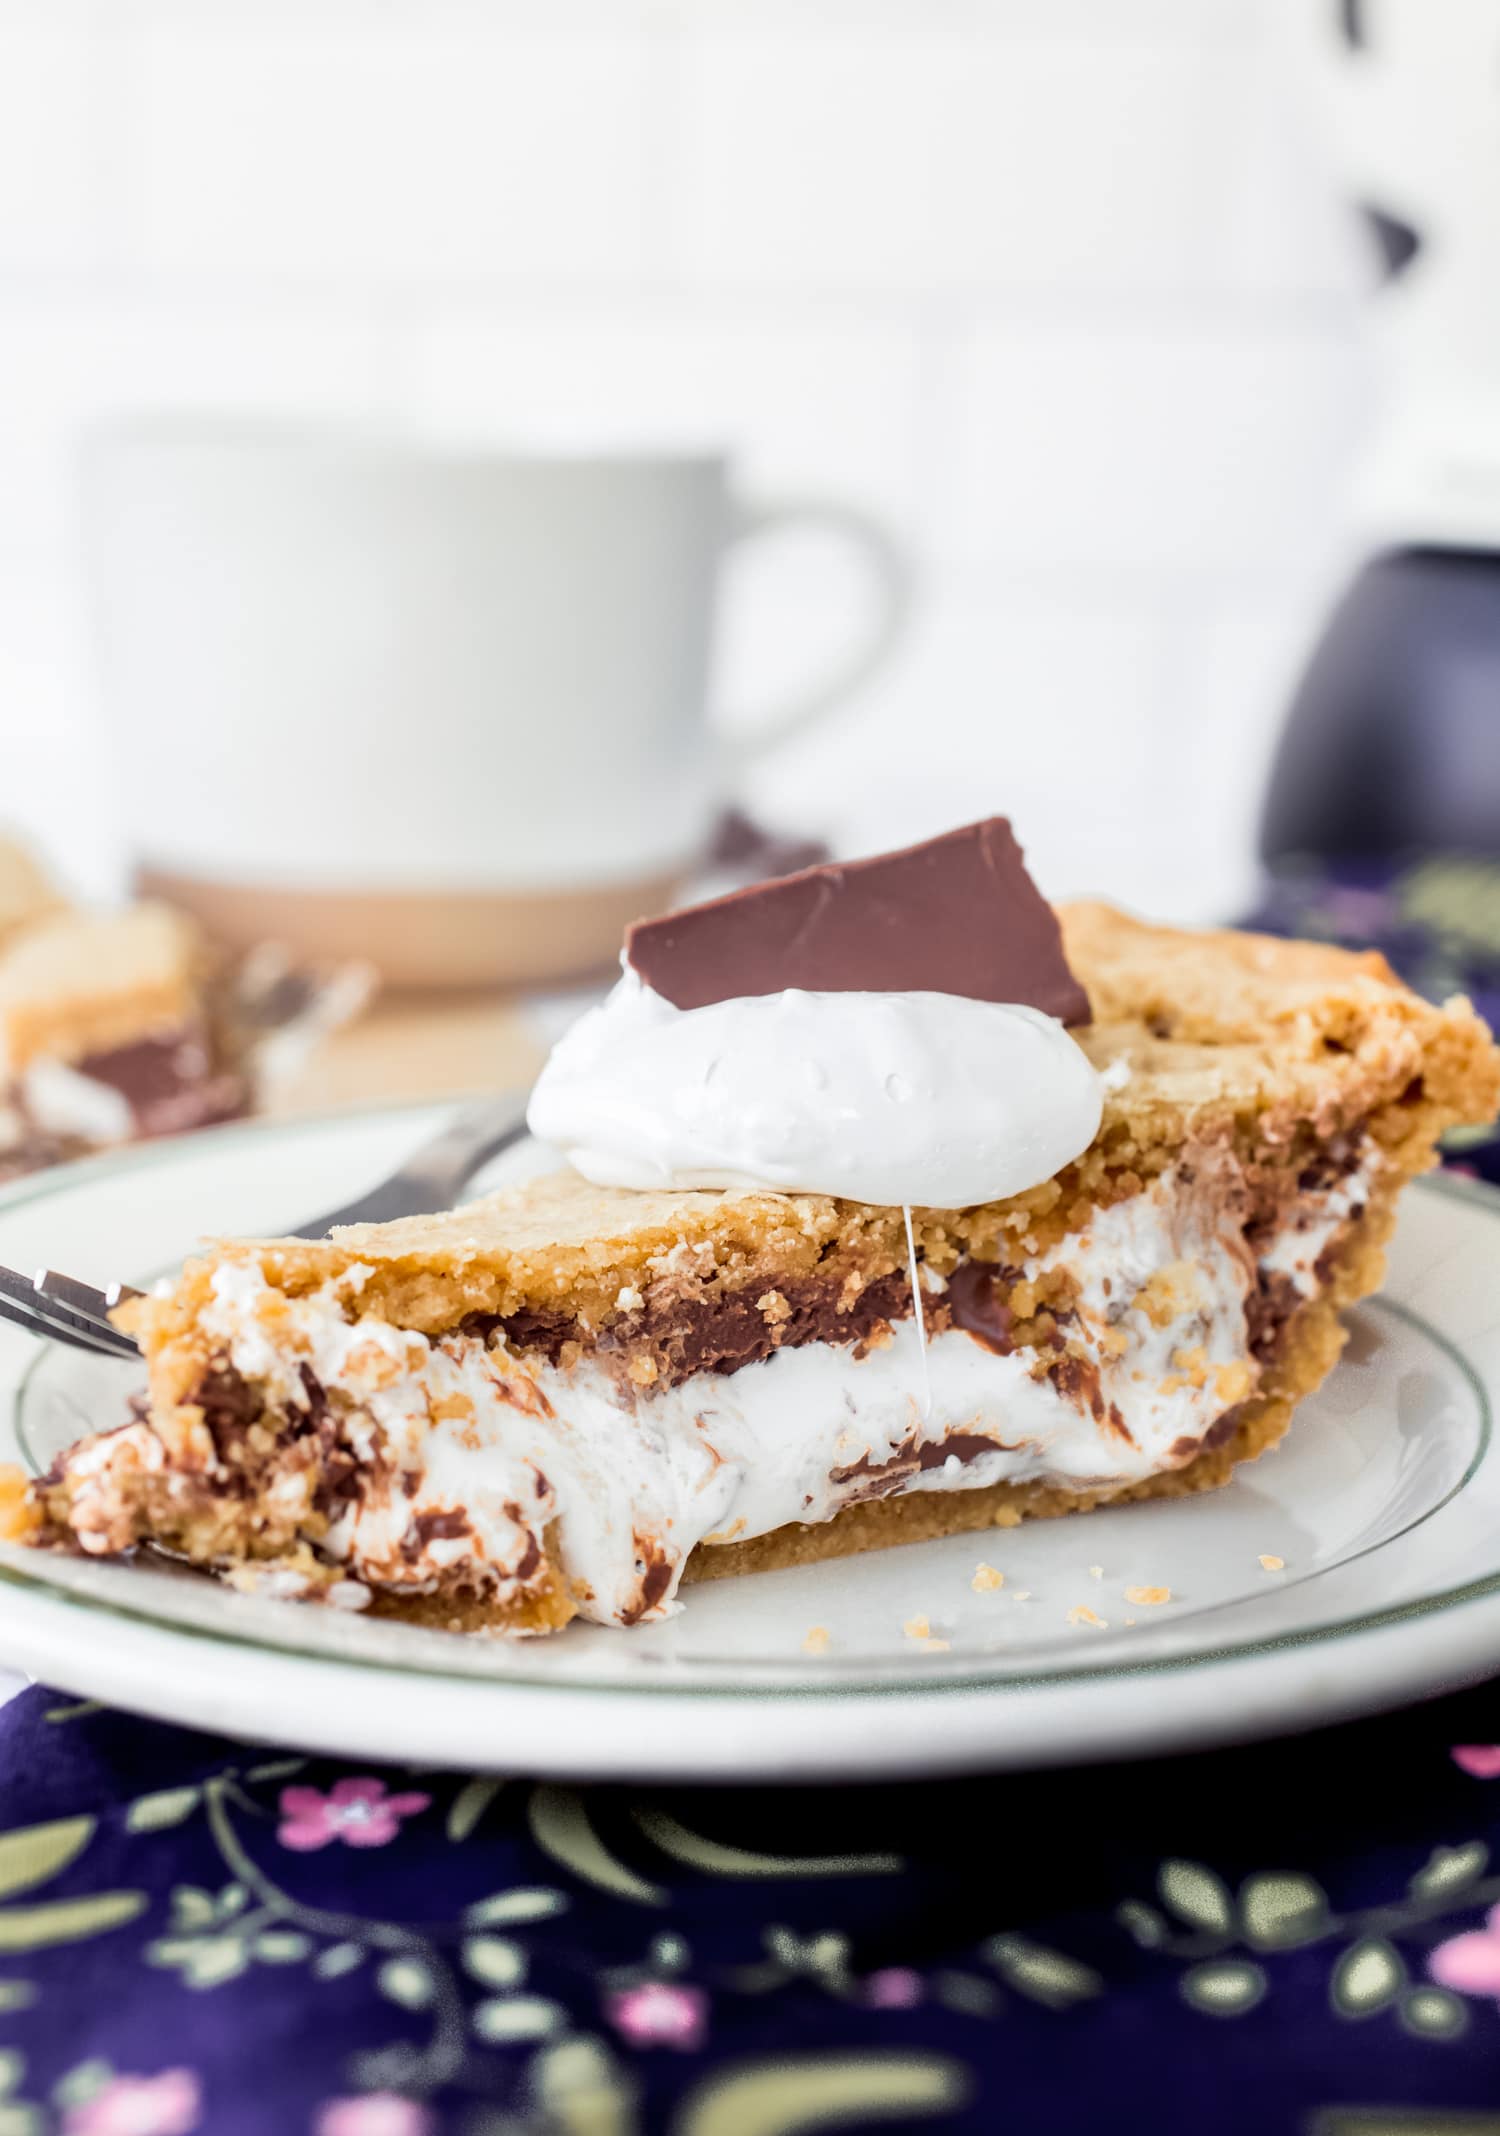 A slice of s'mores pie served on a plate topped with marshmallow cream and chocolate